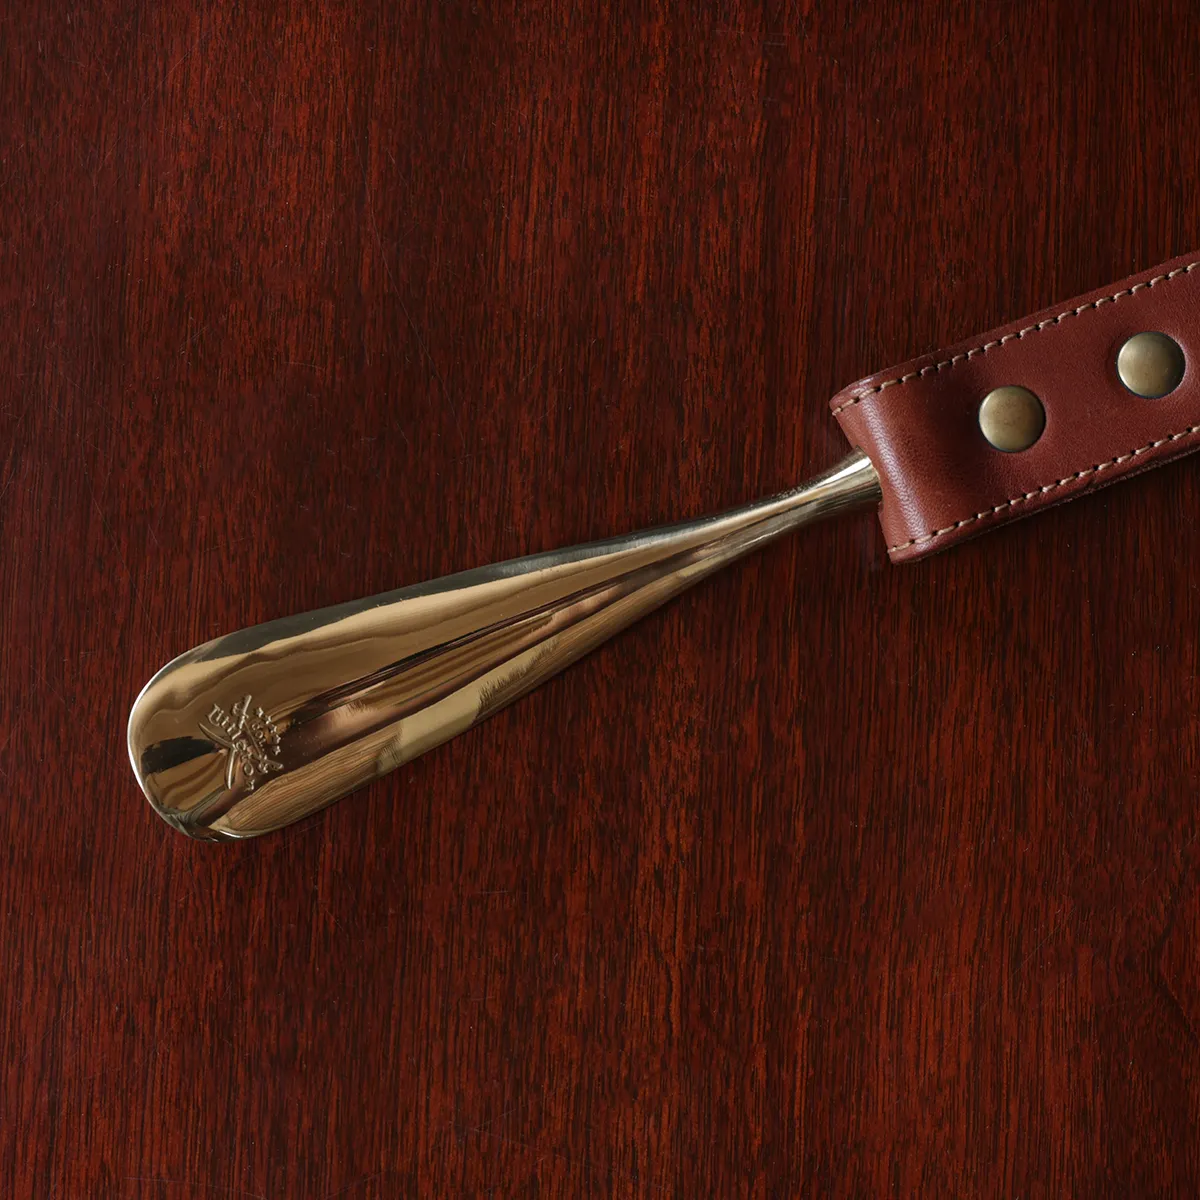 no2 shoehorn with personalization plate on a wooden table